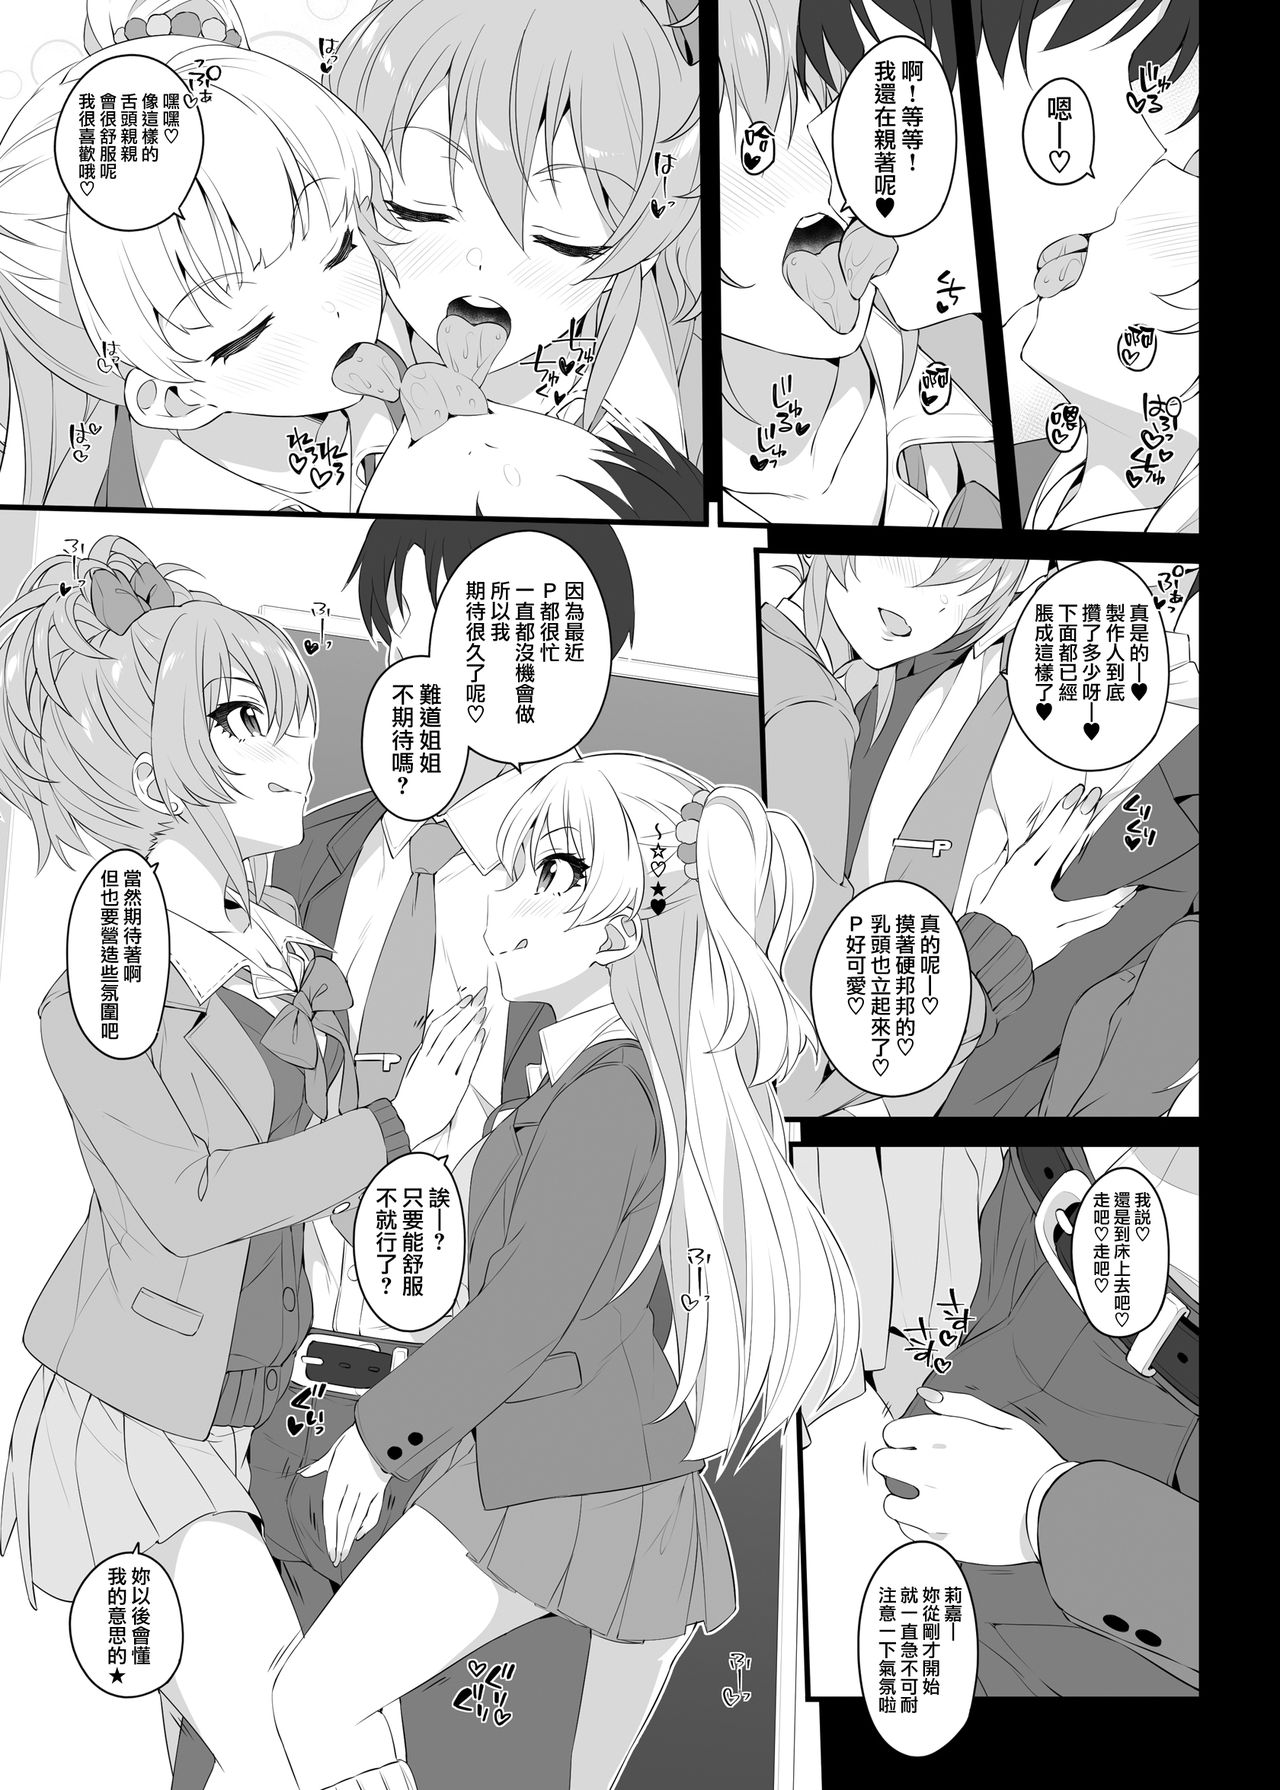 [Jekyll and Hyde (MAKOTO)] The first secret meeting of the Charismatic Queens. (THE IDOLM@STER CINDERELLA GIRLS) [Chinese] [無邪気漢化組] [Digital] page 9 full